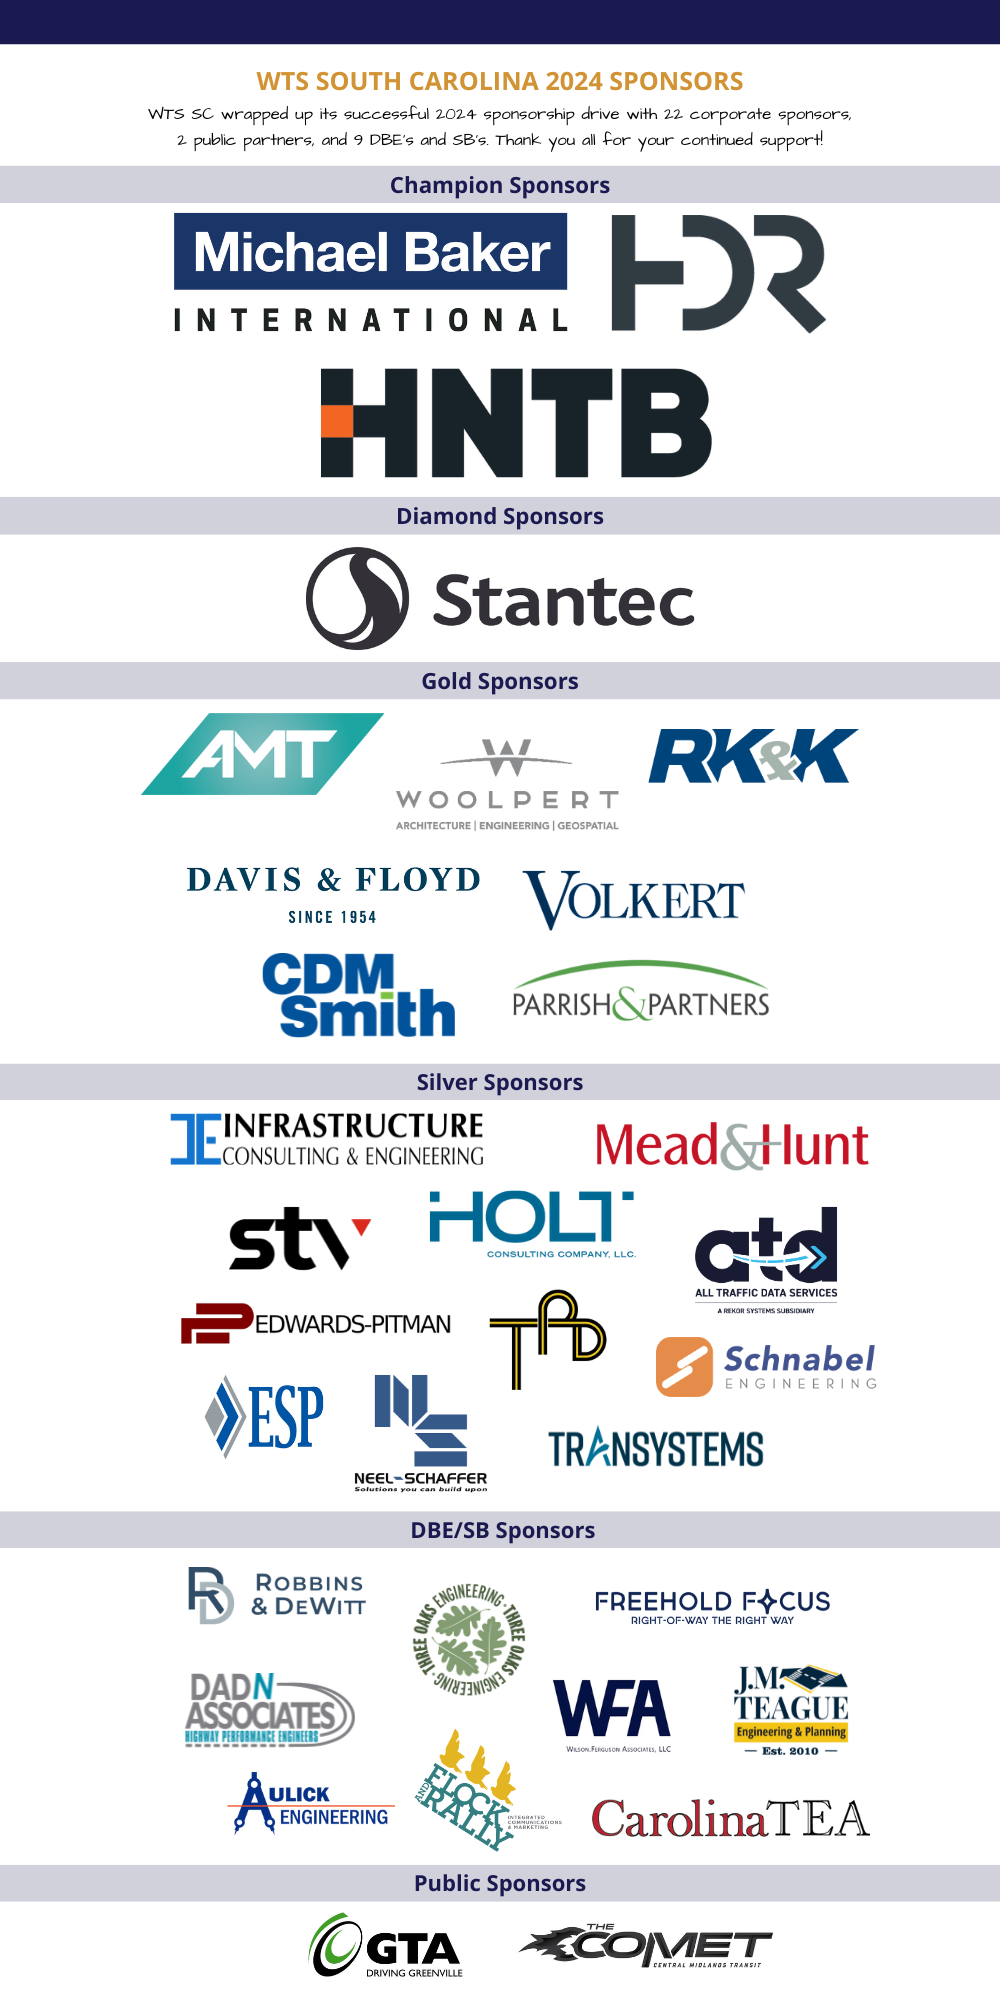 2024 Corporate Sponsors and Public Partners